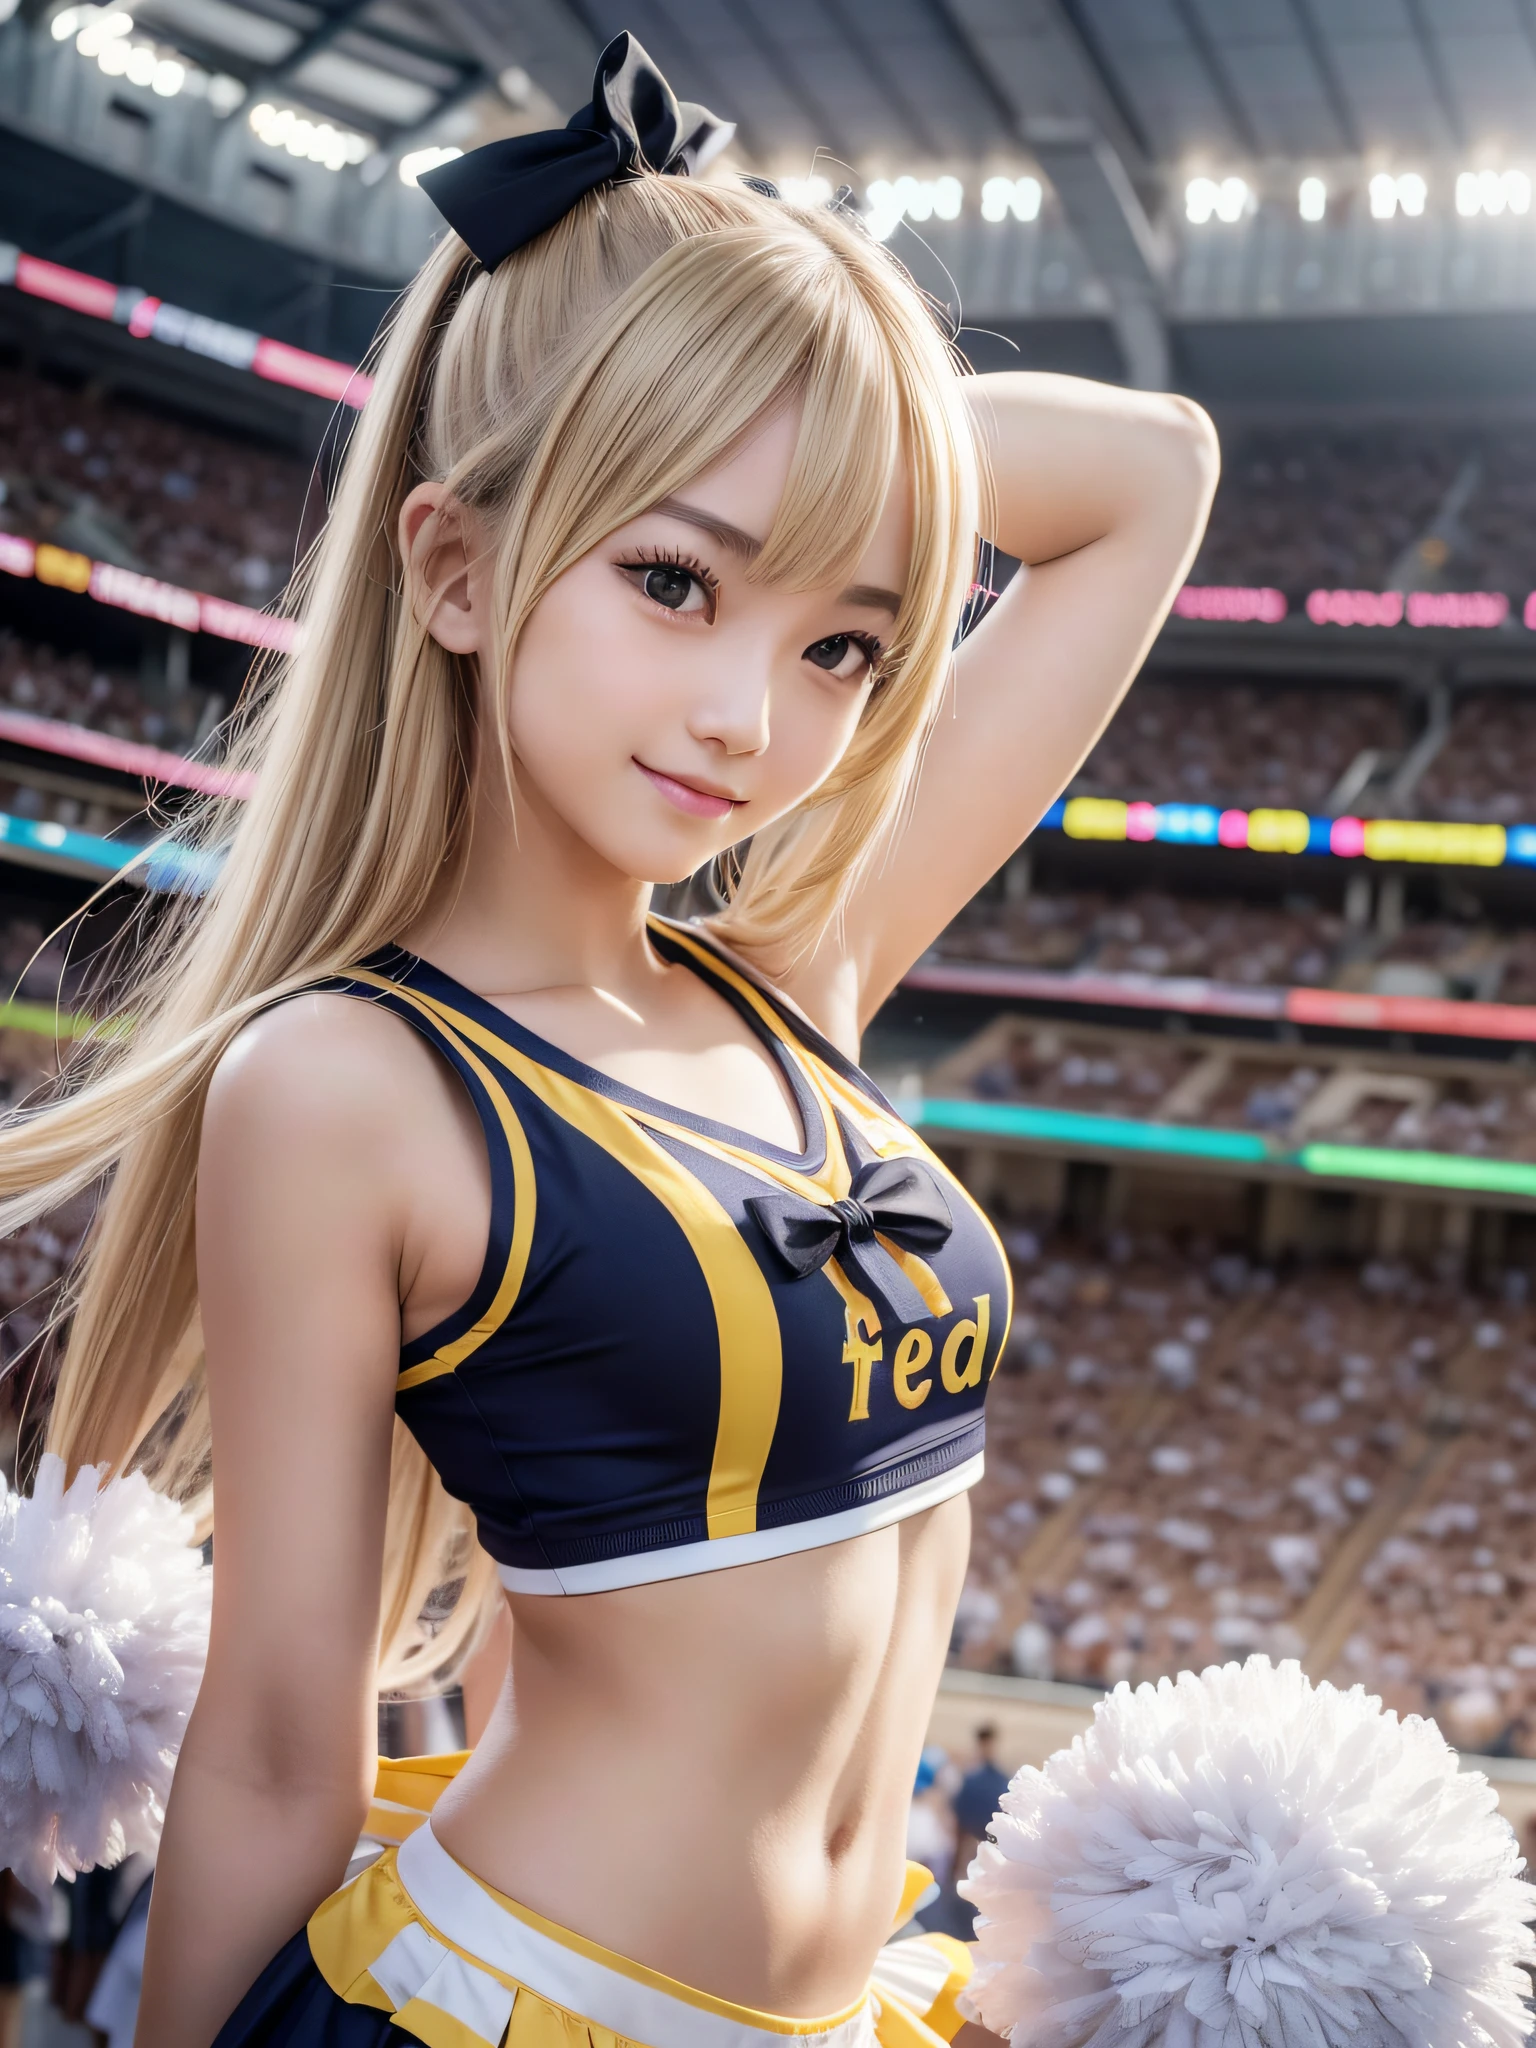 Ala-Fed Asian cheerleader posing dynamically with pom-pom in stadium, close-up, cosplay photo, anime cosplay, small breasts, RAW photo, Best Quality, High Resolution, (Masterpiece), (Photorealism:1.4), Professional Photography, Sharp Focus, HDR, 8K Resolution, Complex Details, Depth of Field, Highly detailed CG Unity 8k wallpaper, front light, NSFW, woman, girl, beautiful supermodel, smile, slender, small cheer uniform, yellow, marie rose, sailor suit